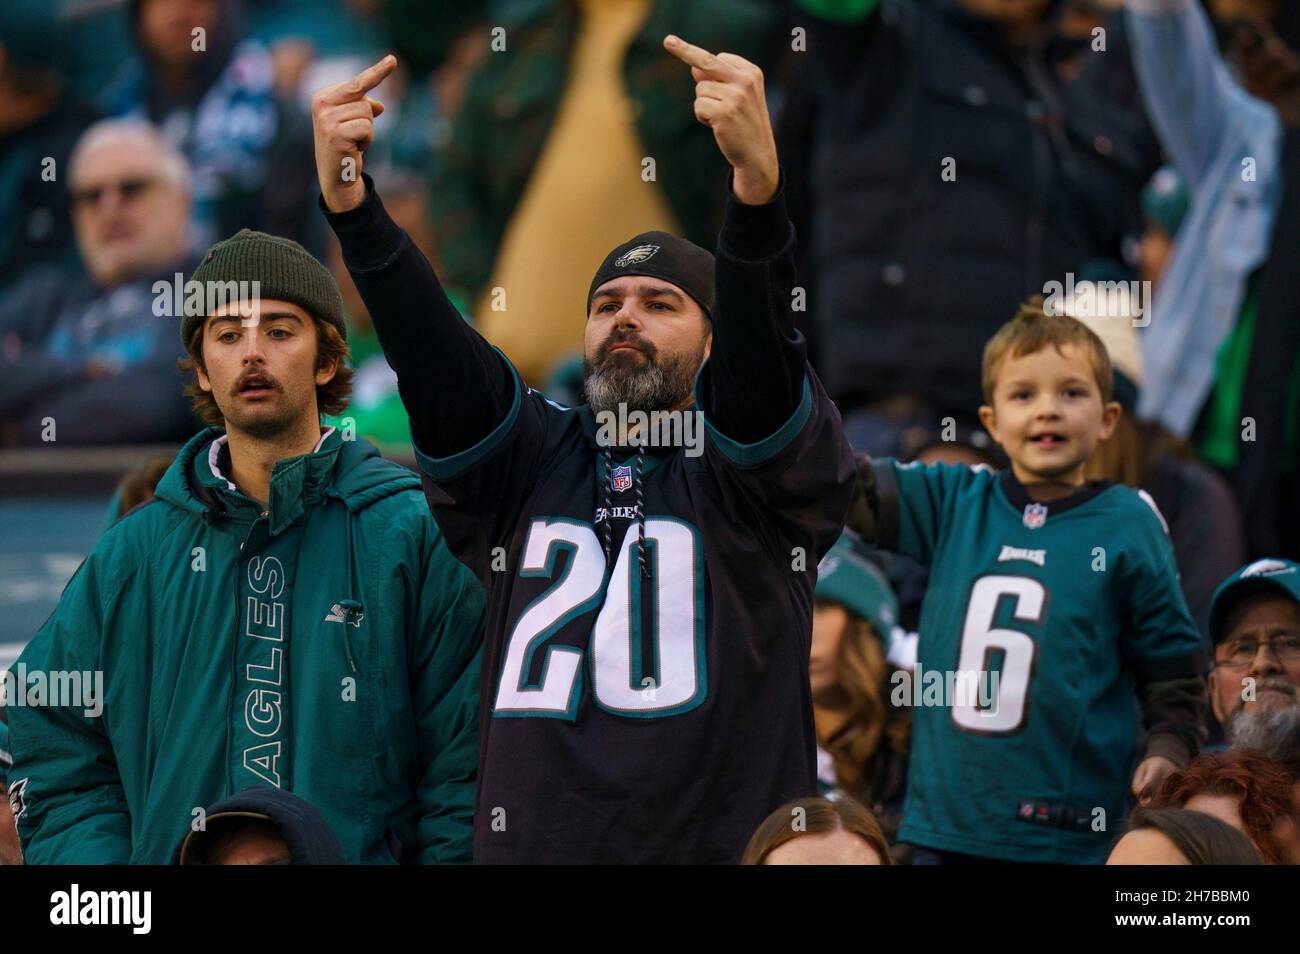 Philadelphia, Pennsylvania, USA. 21st Nov, 2021. Philadelphia Eagles fans  react to the penalty call during the NFL game between the New Orleans Saints  and the Philadelphia Eagles at Lincoln Financial Field in